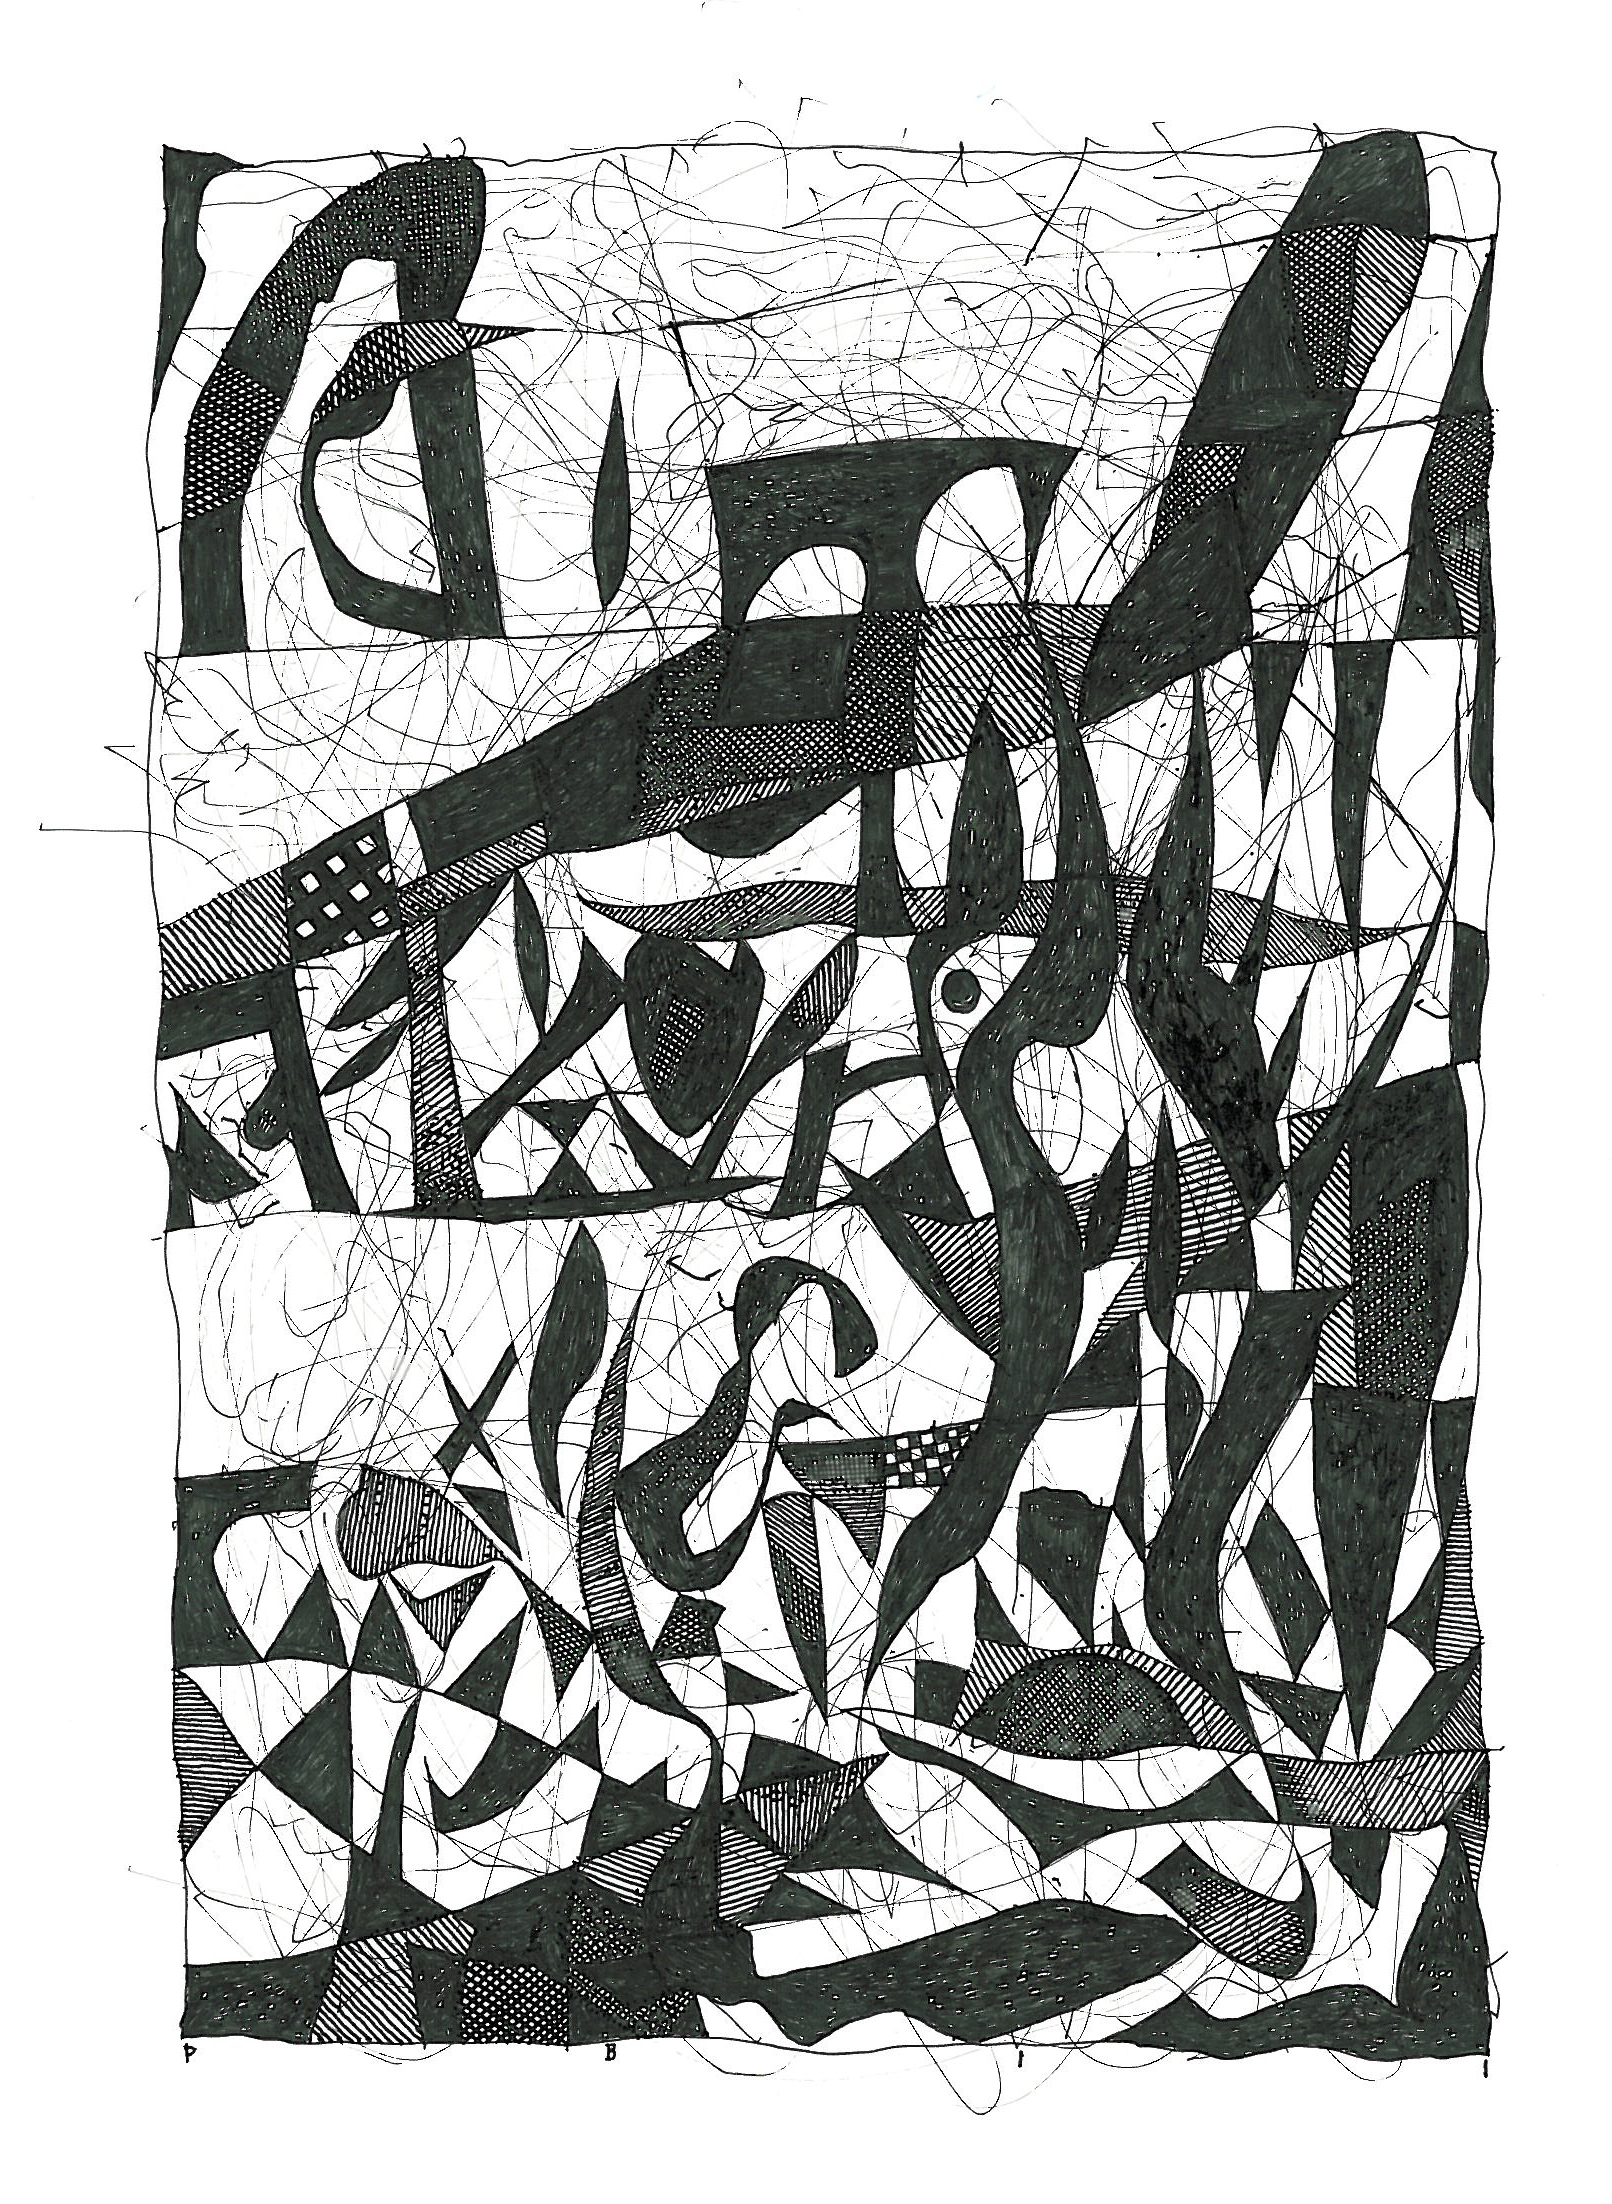  Pen and Ink - 4.5" x 6.5" - 2011 